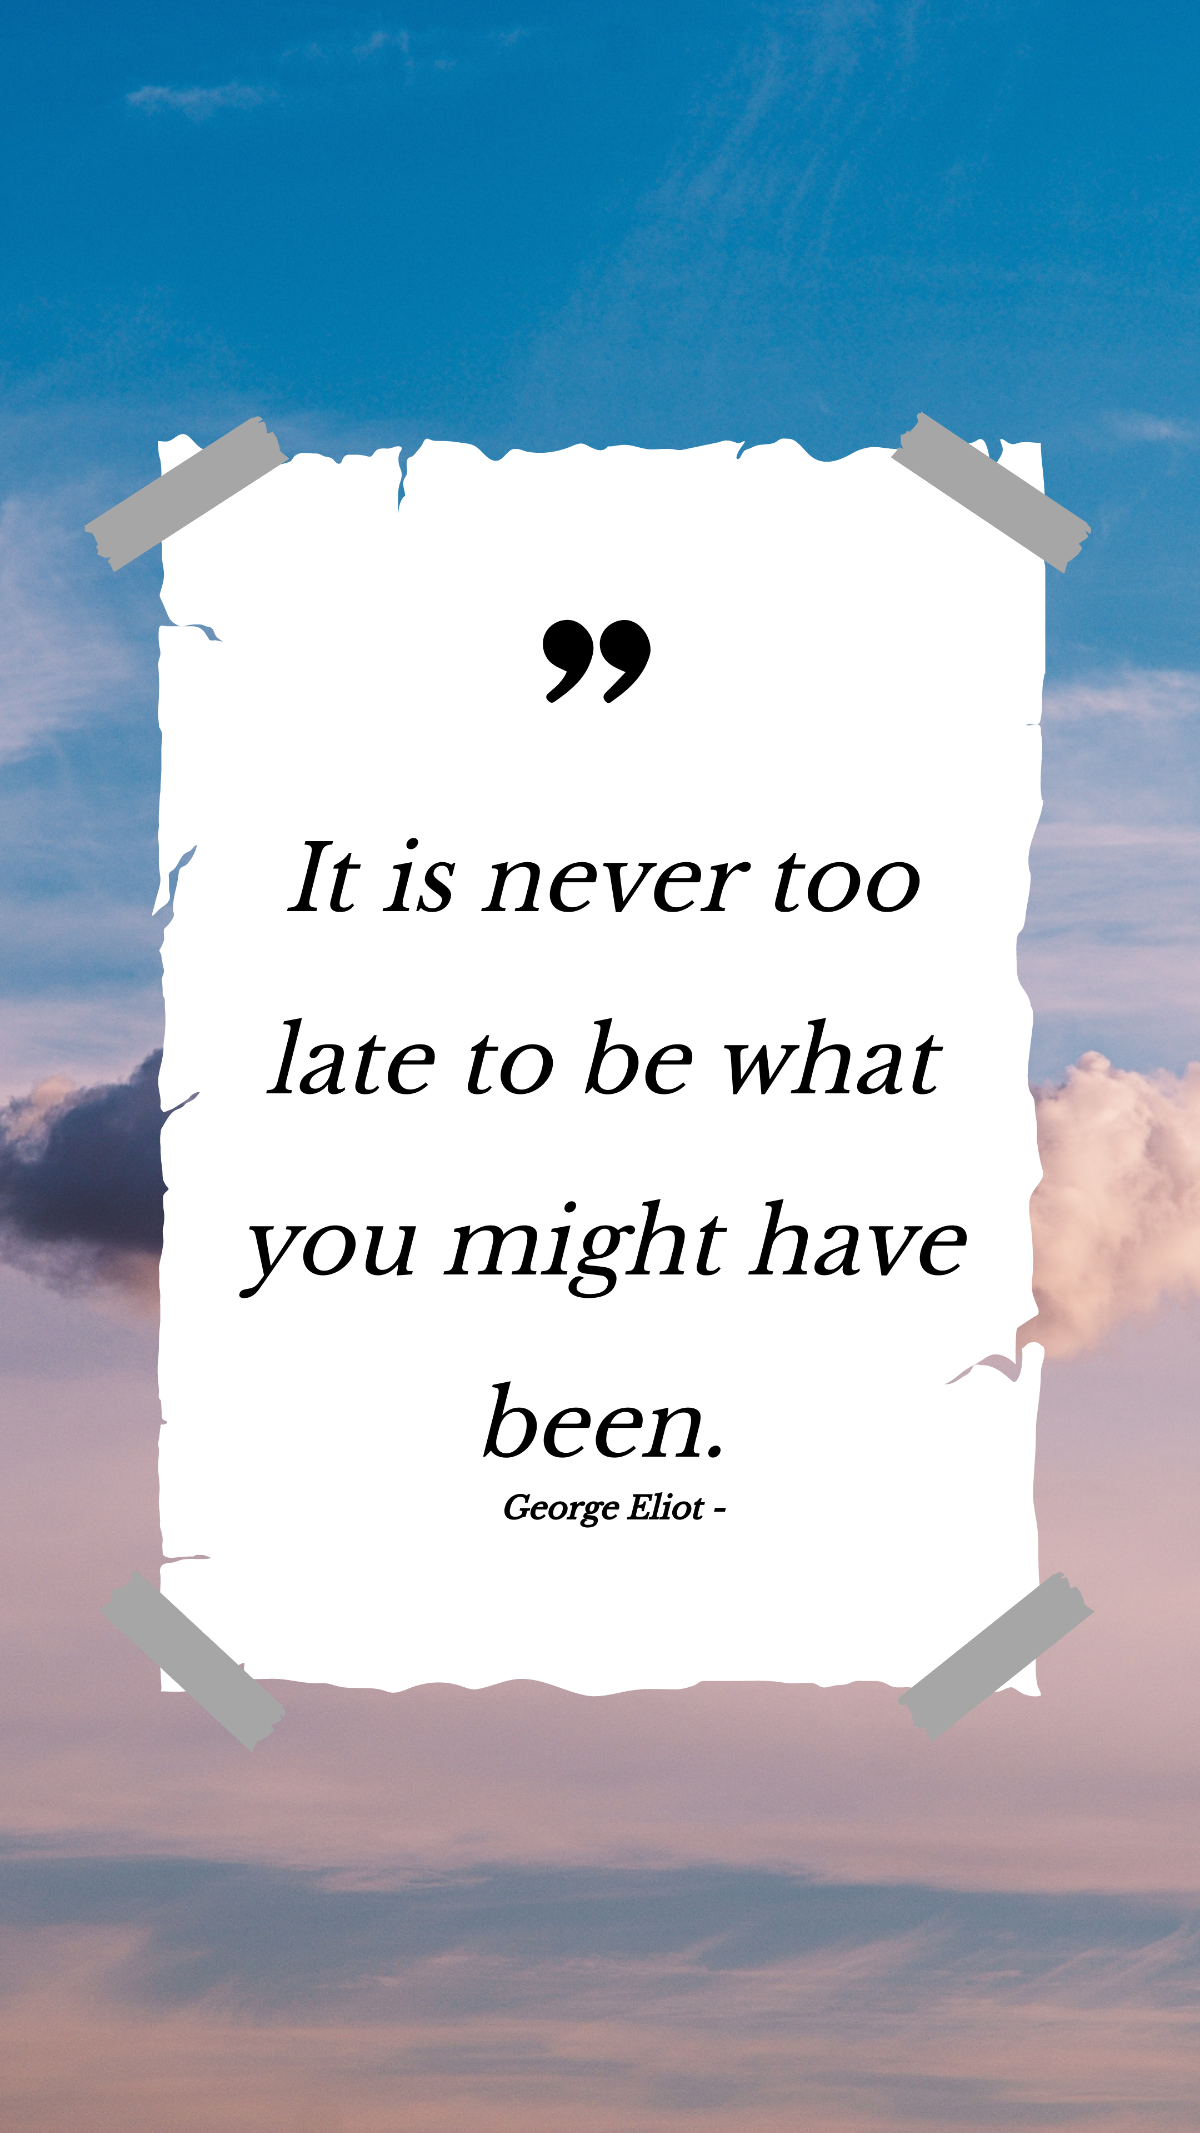 George Eliot - It is never too late to be what you might have been.